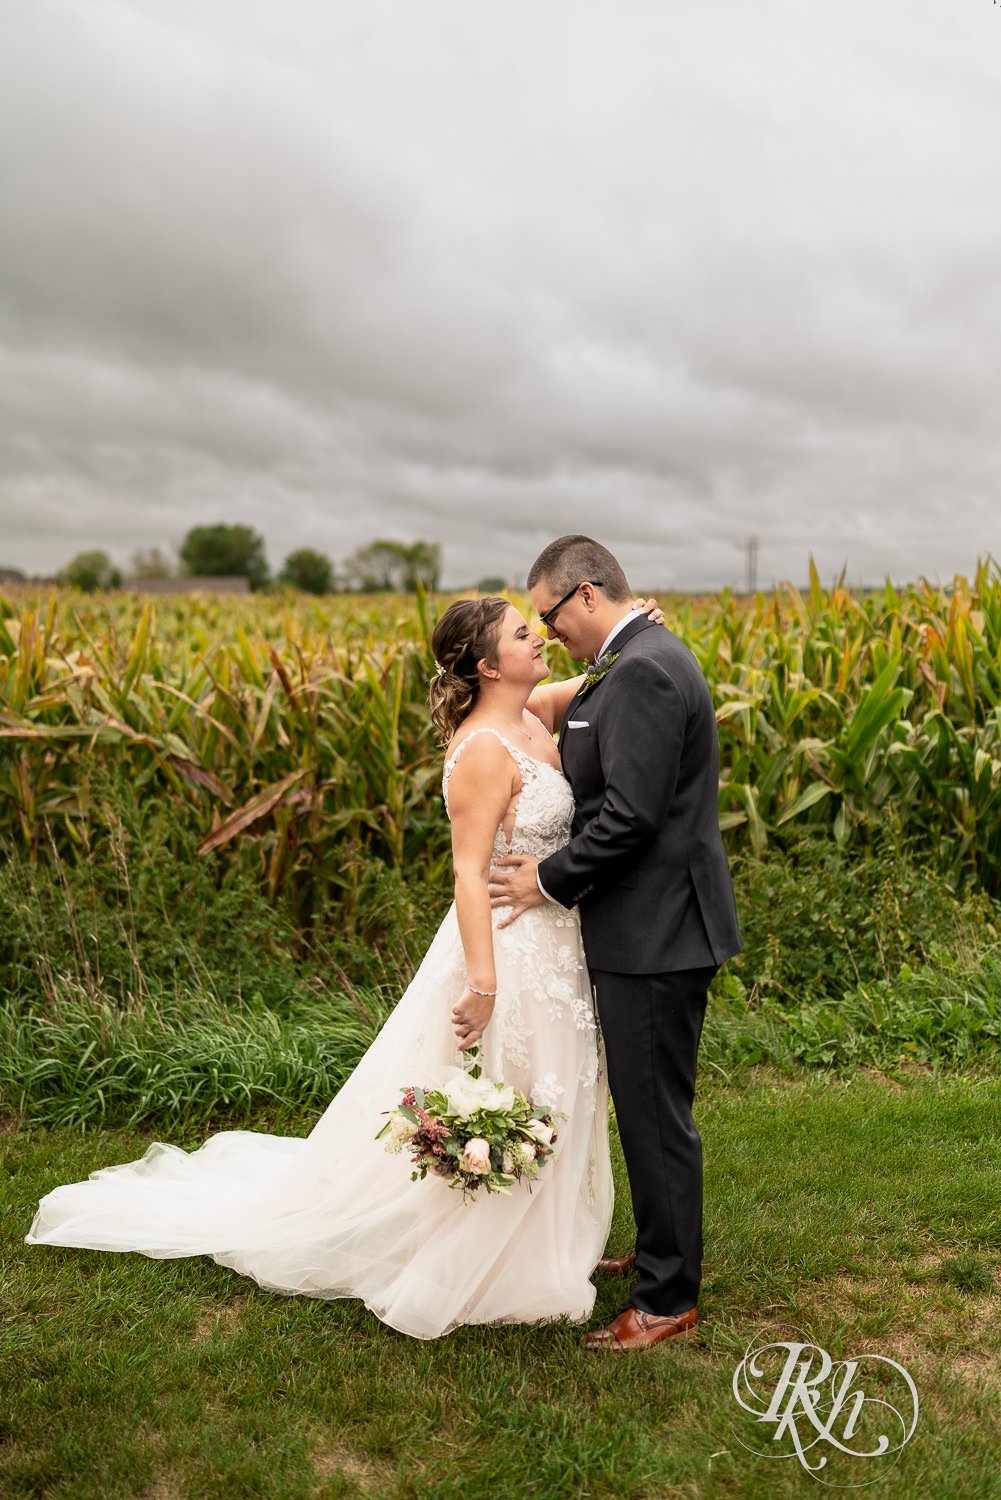 Bride and groom looking at each other in front of cornfield at Glenhaven Events in Farmington, Minnesota.